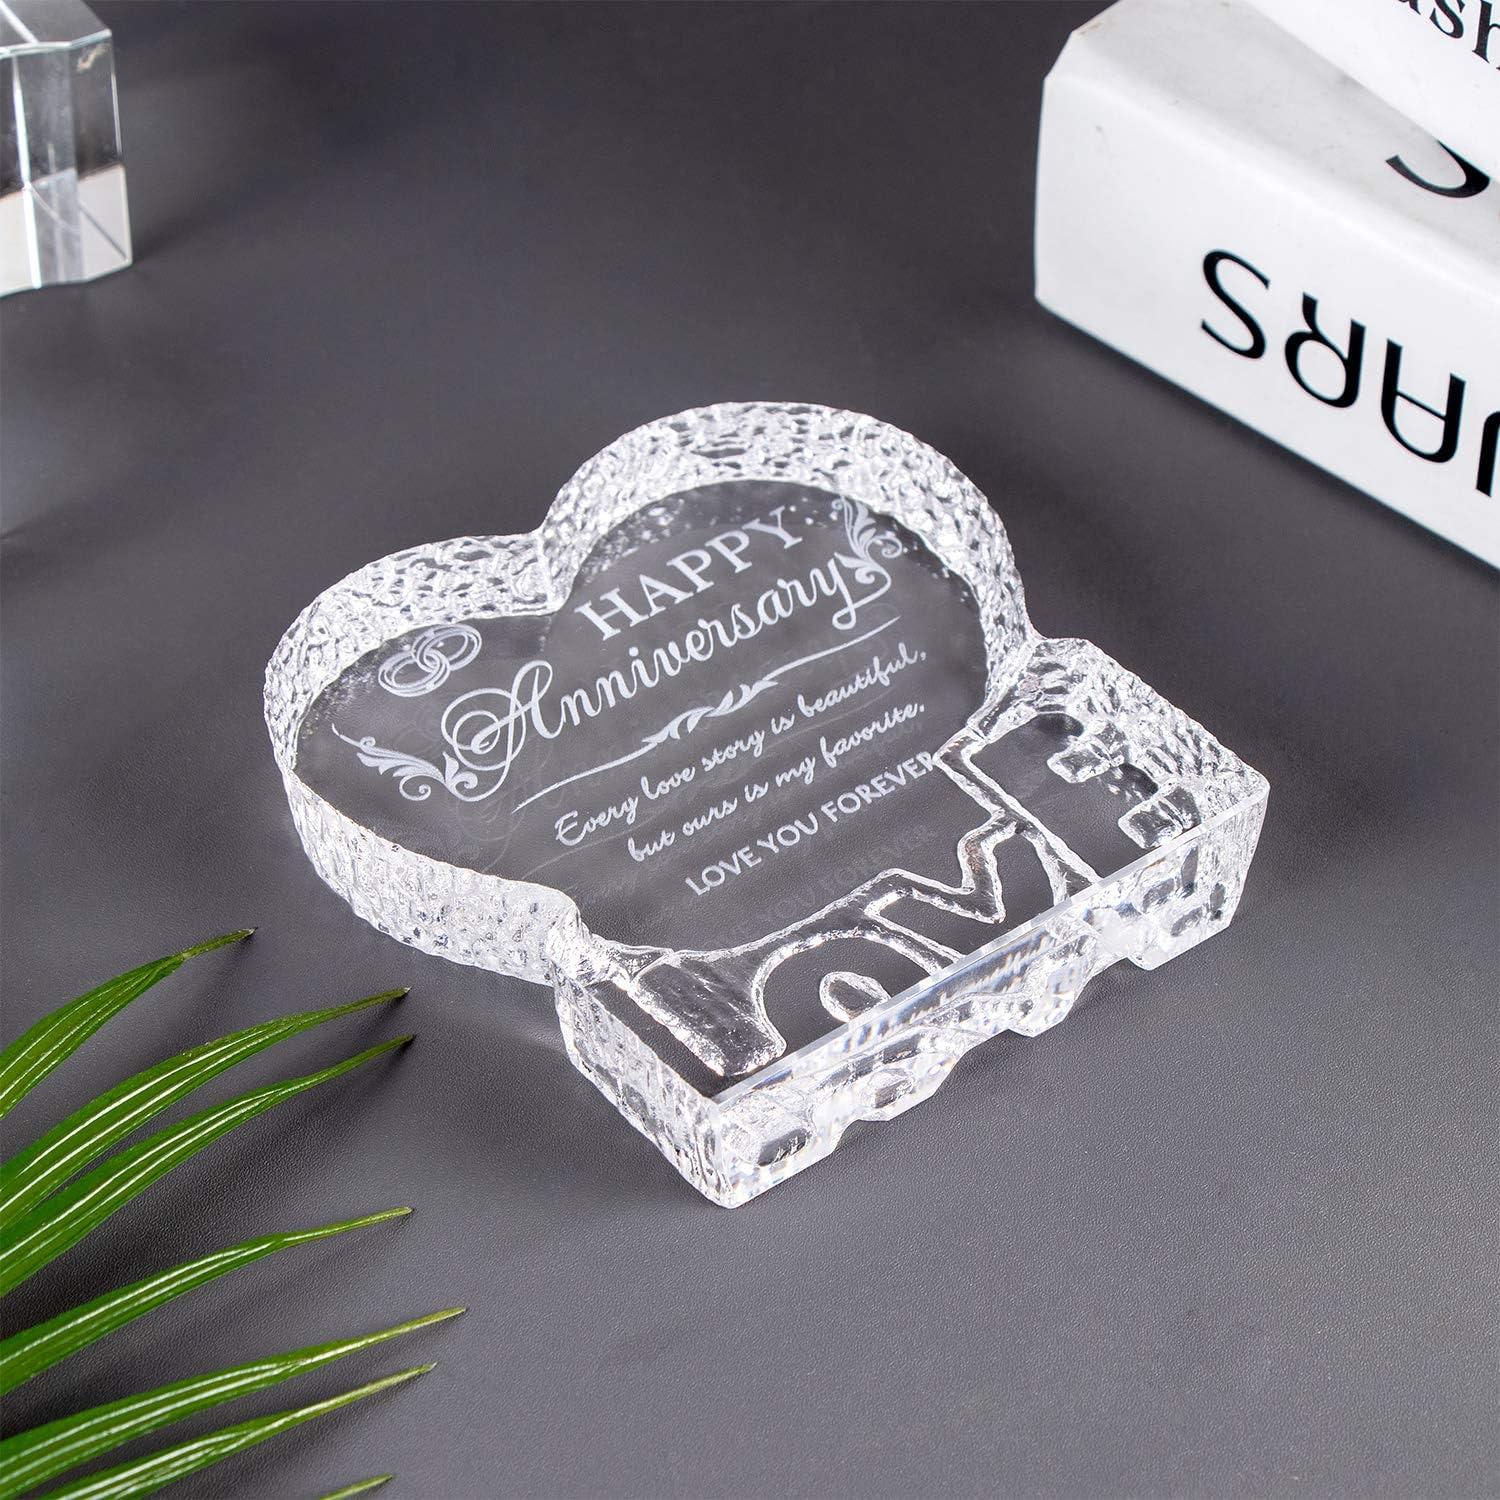 Wedding Anniversary Romantic Gift for Her, Crystal Happy Anniversary for Wife - Decotree.co Online Shop